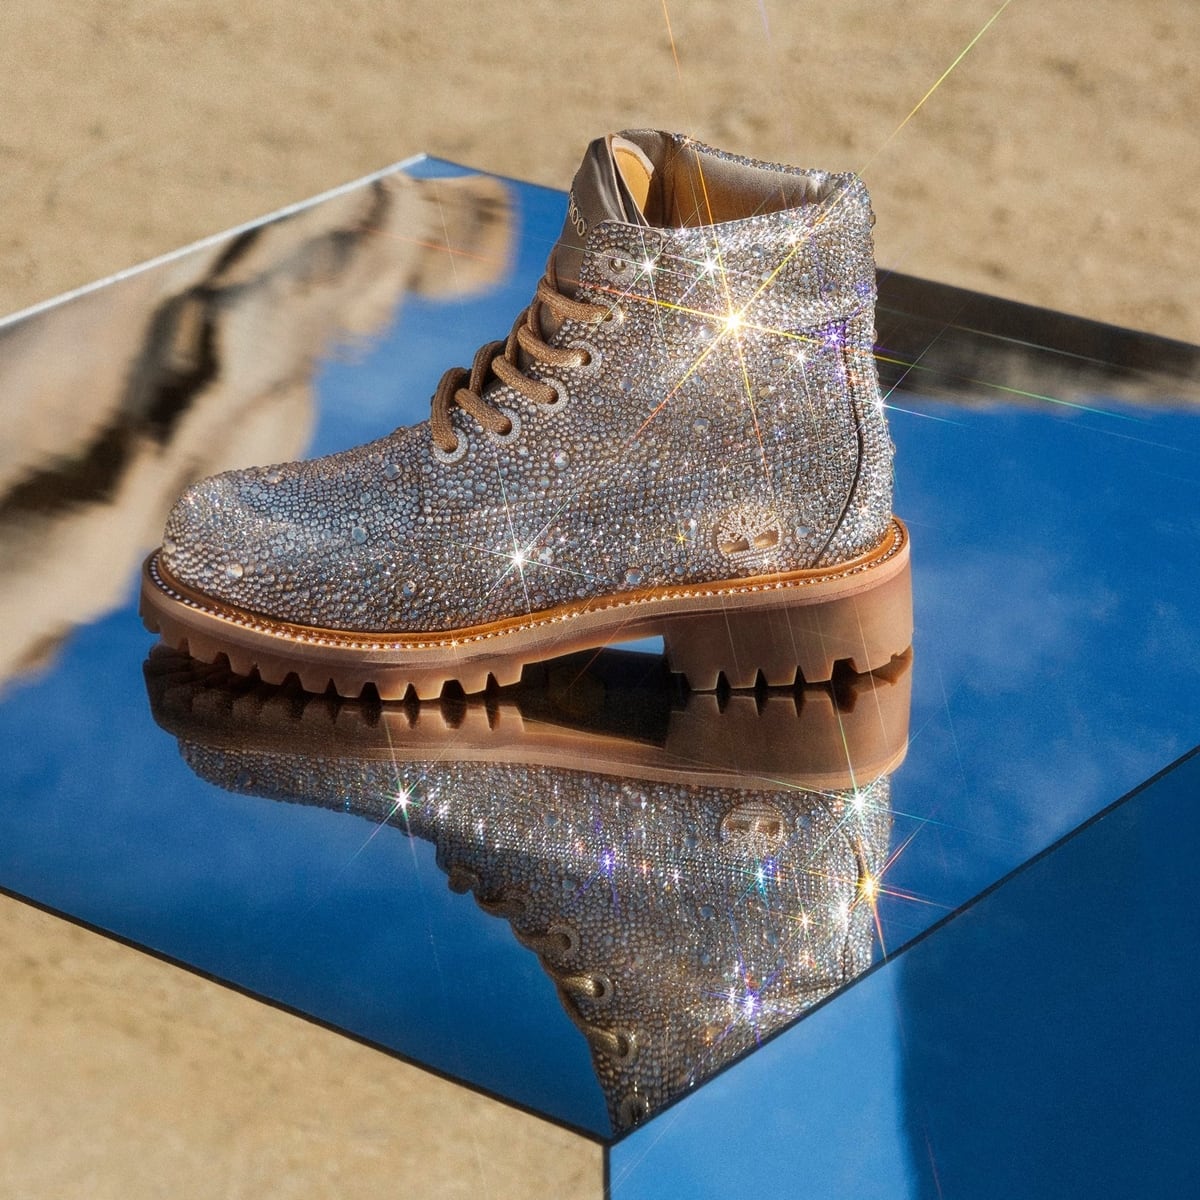 Jimmy Choo x Timberland boots with all-over Swarovski hotfix crystals